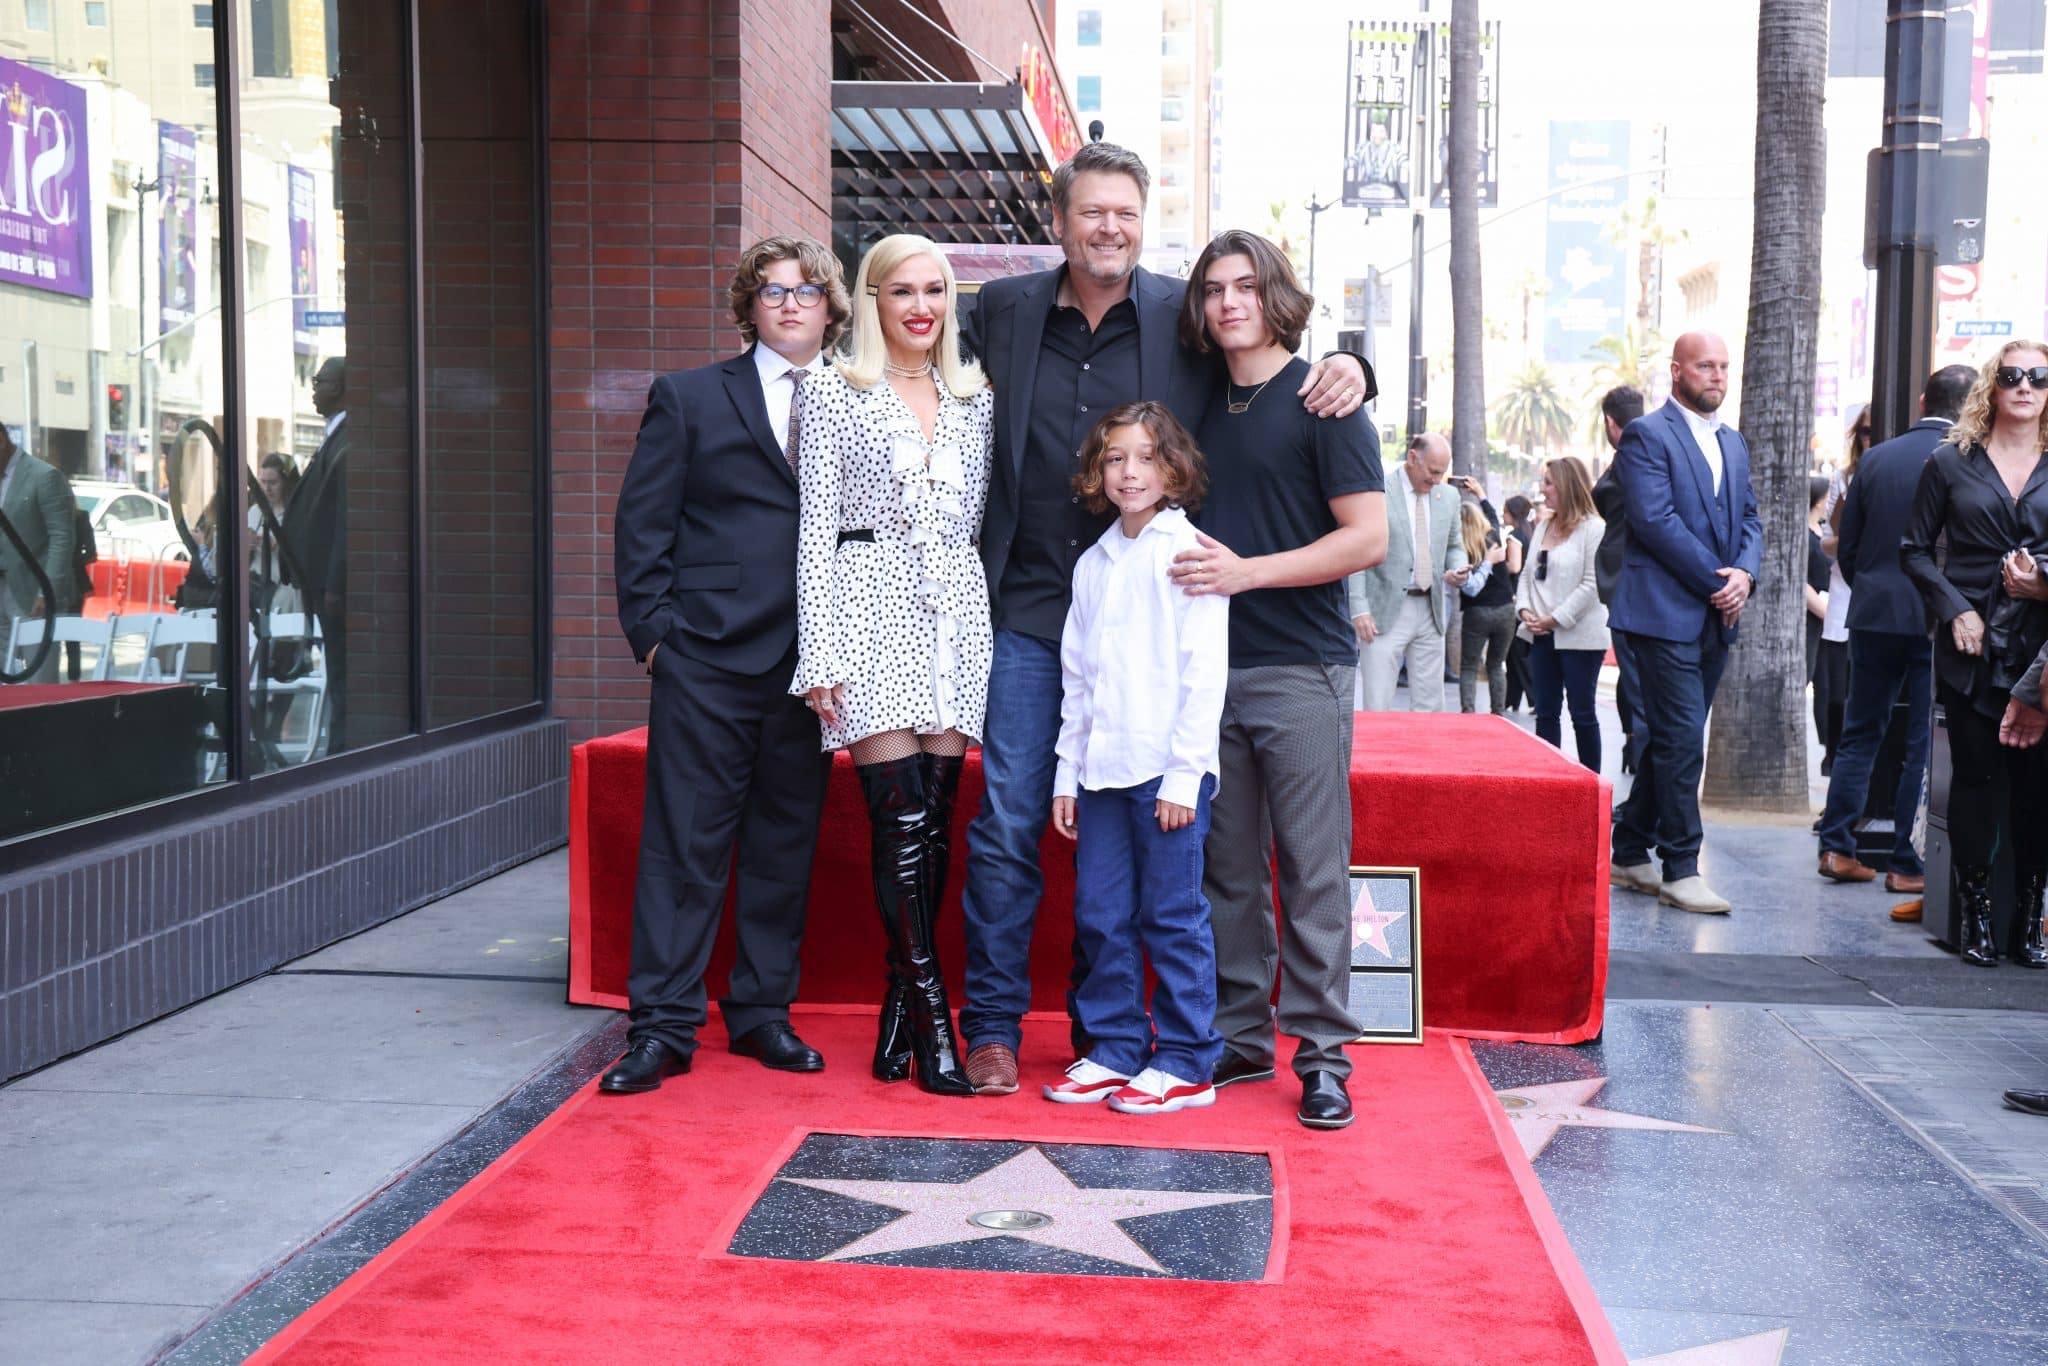 Zuma Rossdale, Gwen Stefani, Blake Shelton, Apollo Rossdale at the star ceremony where Blake Shelton is honored with a star on the Hollywood Walk of Fame on May 12, 2023 in Los Angeles, California. 